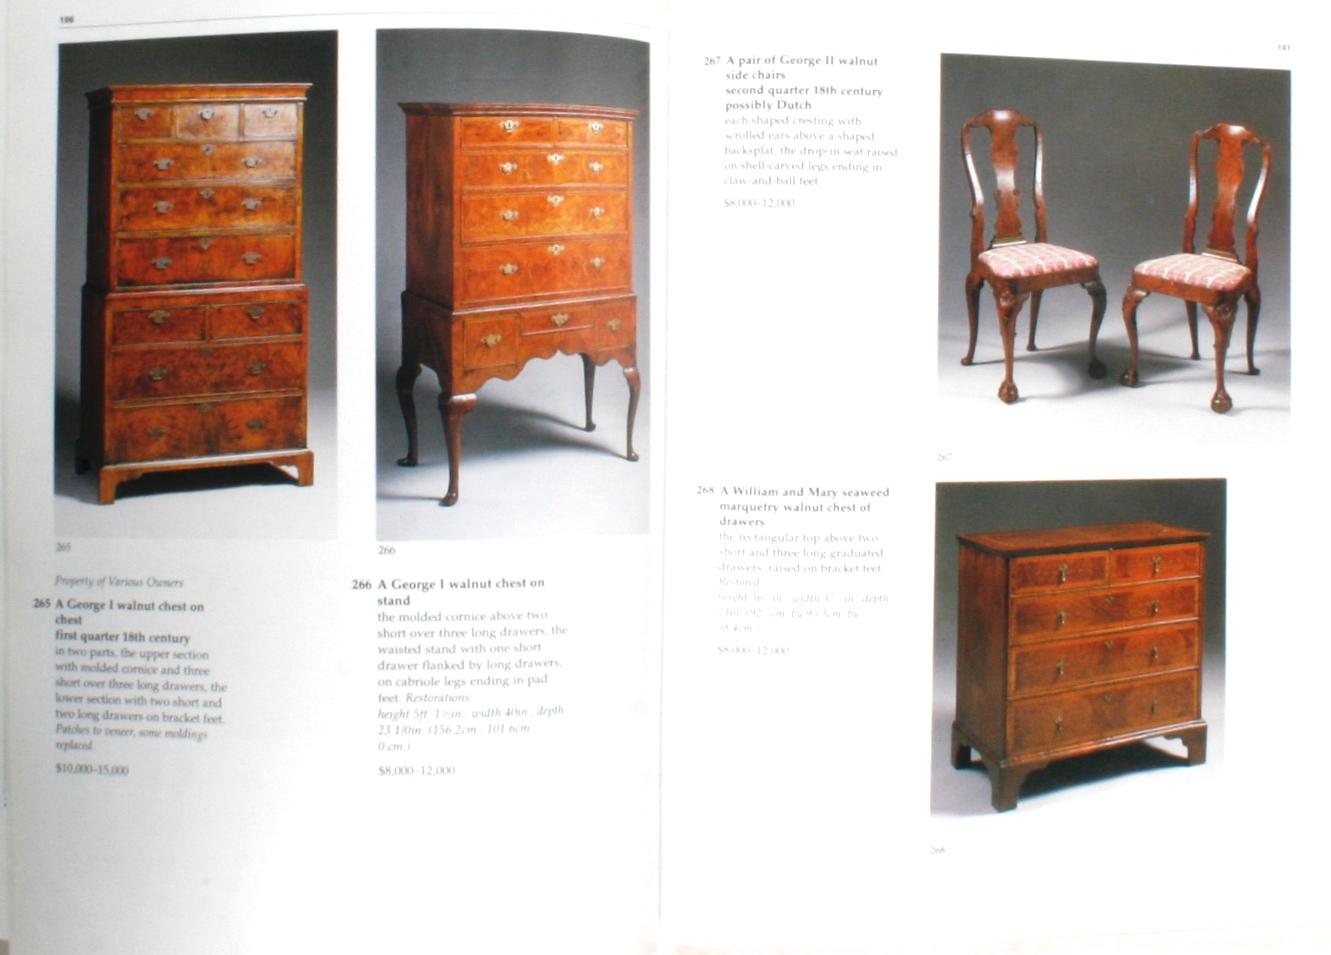 20th Century Sotheby's; Important English Furniture, European Ceramics and Decorations For Sale